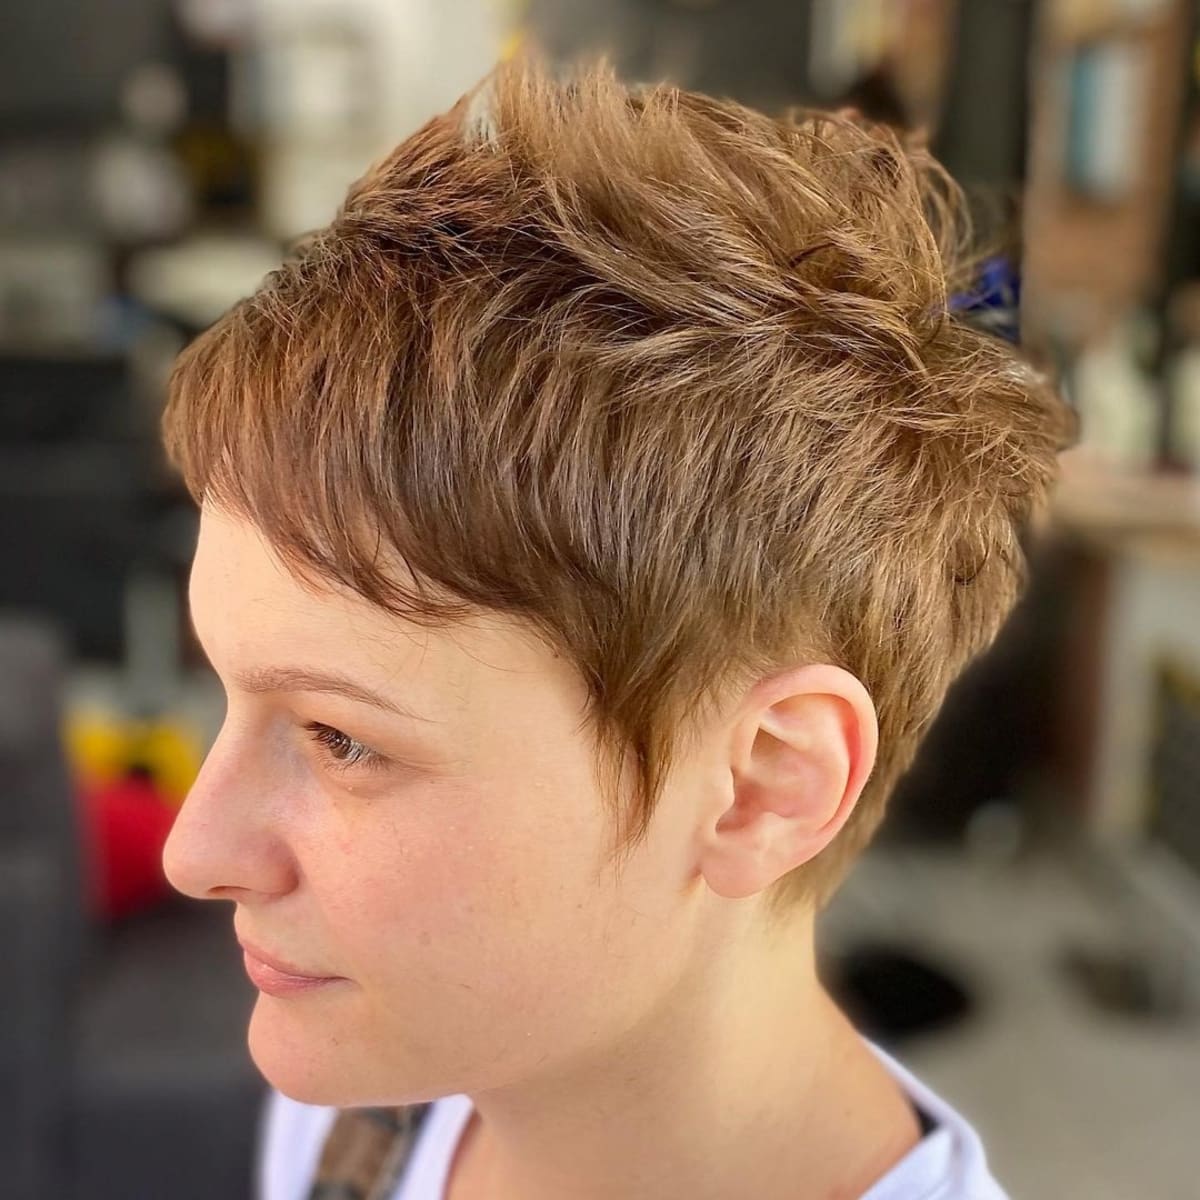 Classic Textured Pixie Cut for Women